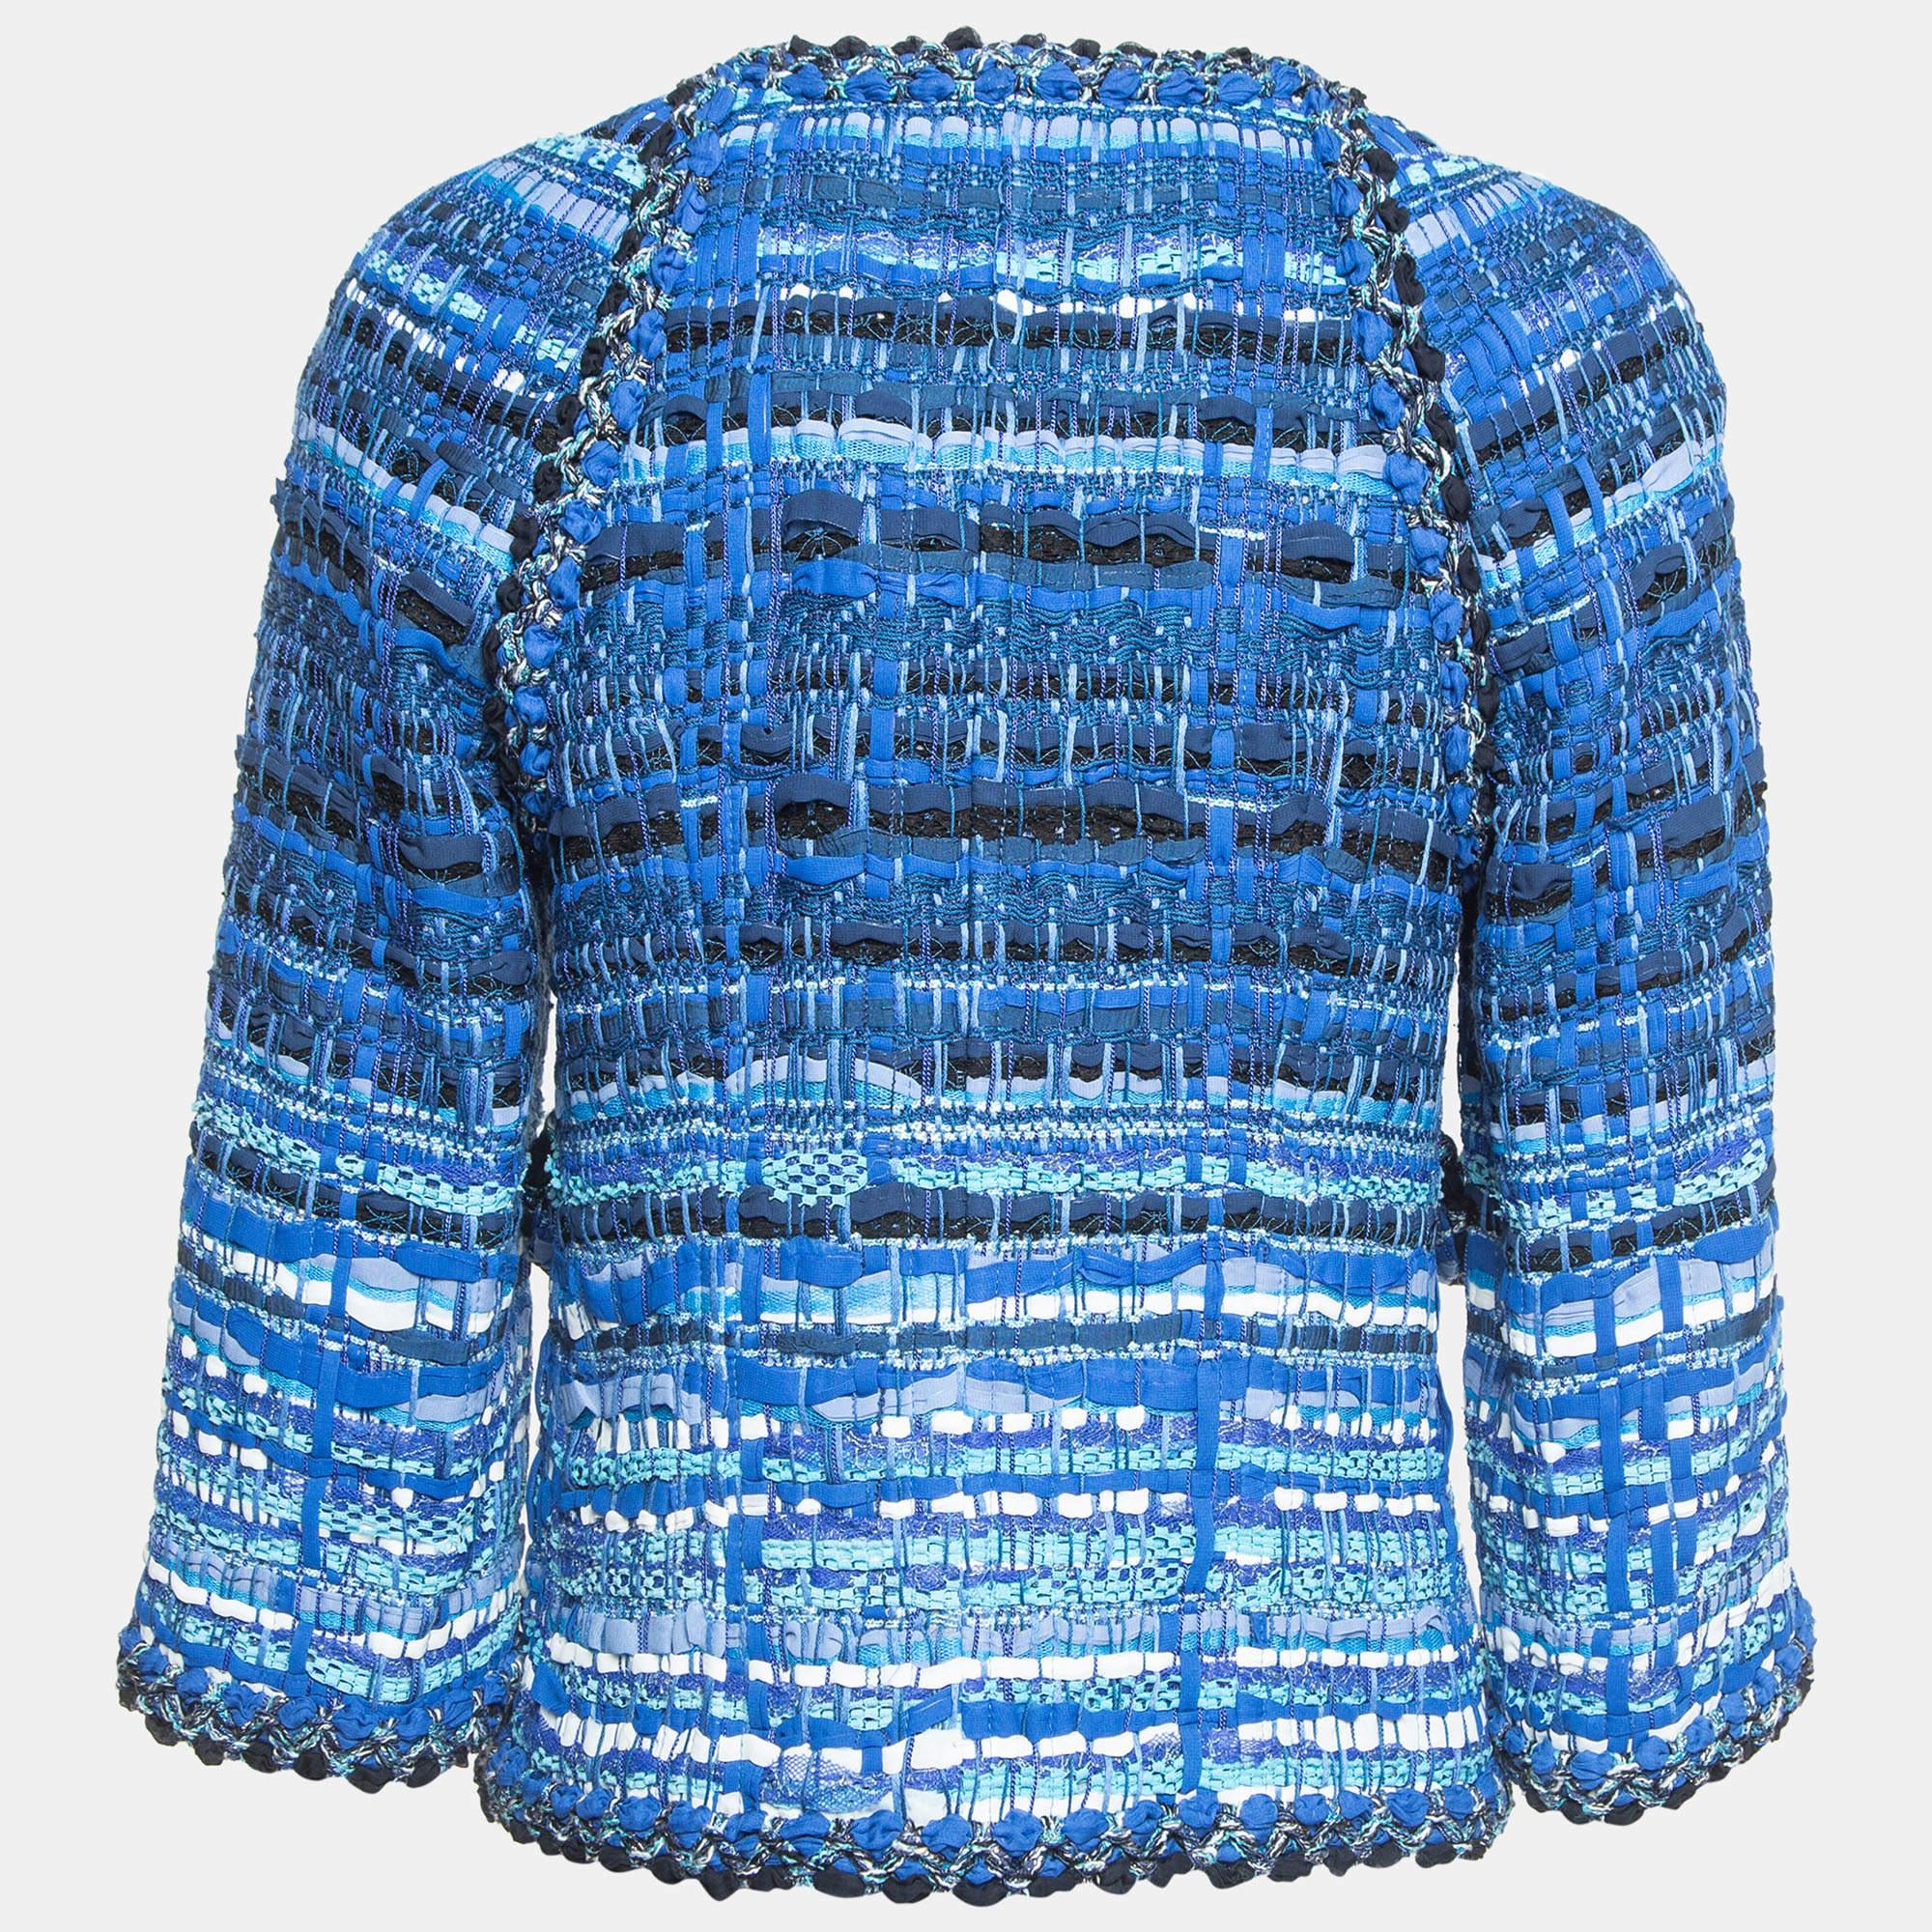 The Chanel tweed jacket epitomizes sophistication with its exquisite blend of classic tweed and whimsical owl-shaped buttons. Crafted with meticulous attention to detail, it boasts a refined silhouette adorned with elegant blue ribbon accents. This